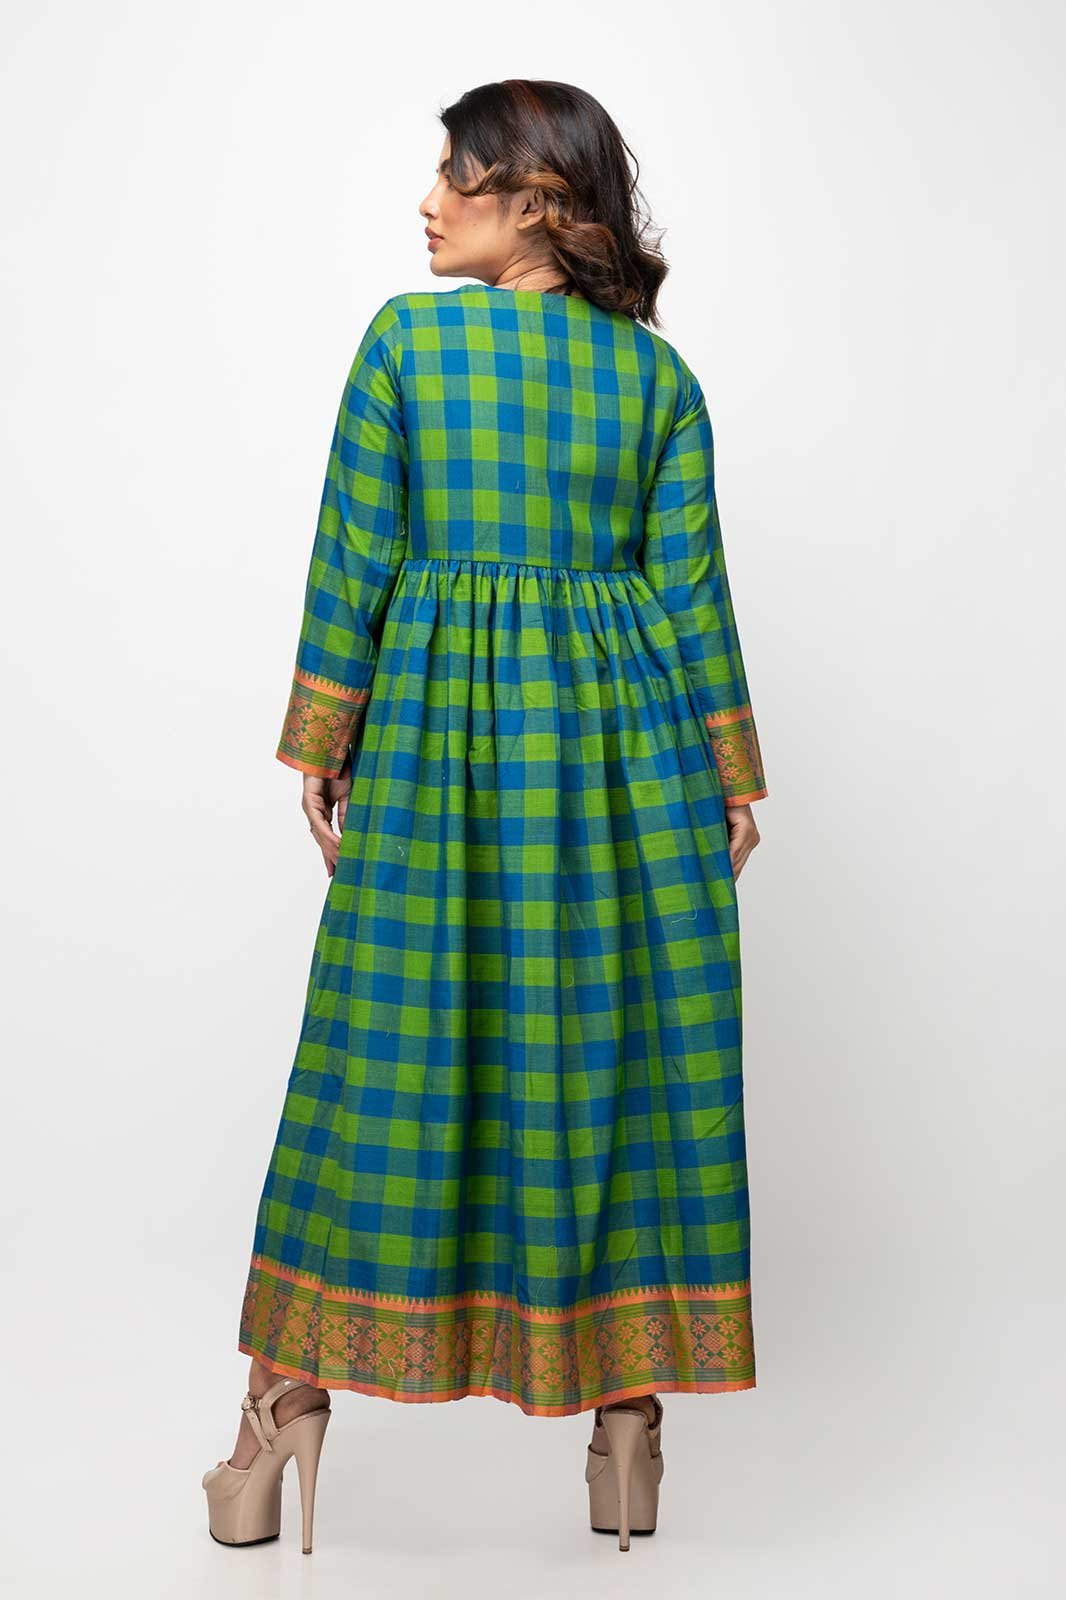 ladies cotton clothing , organic cotton handmade dress, full length cotton a line dress, long women dresses, women's long sleeve dresses, handmade cotton dress, handwoven cotton dress, handmade cotton linen dress,  handwoven printed dresses, knee length dresses formal, , knee length dresses plus size, knee length dress casual, ladies cotton clothing, Indian designer clothing brand, sustainable clothing, cotton dress with sleeves, ladies summer dress, handwoven printed dresses, cotton dress readymade, sepia stories, ladies off shoulder dress, sleeveless dress, cotton dress, women cotton dress, designer cotton dress, summer dresses online, latest summer collection, silk linen cotton dress, silk linen dress